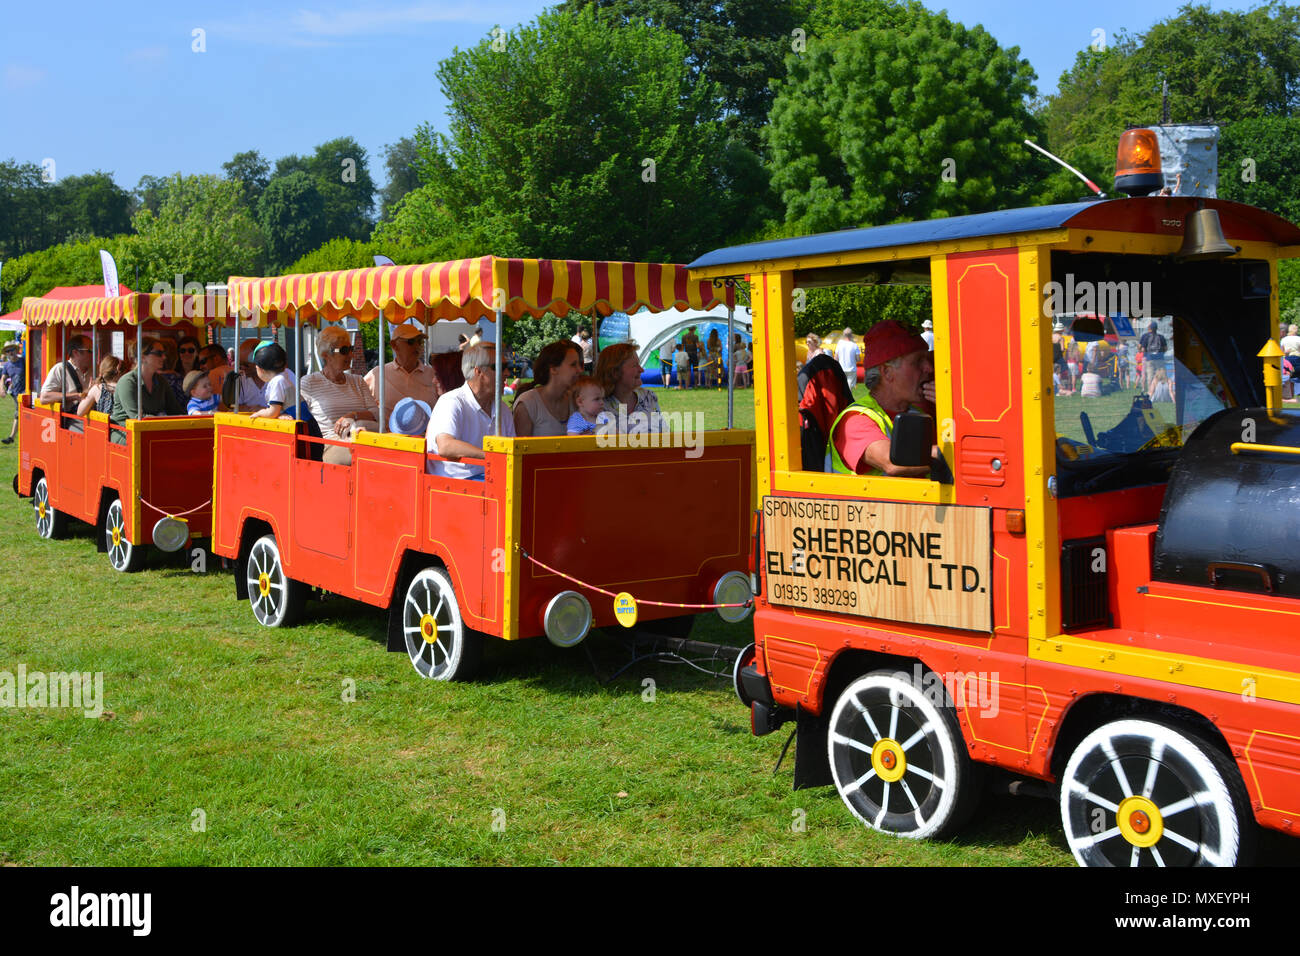 People enjoying a train ride on a hot day at the annual Sherborne Castle Country Fair, Sherborne, Dorset, England. Stock Photo